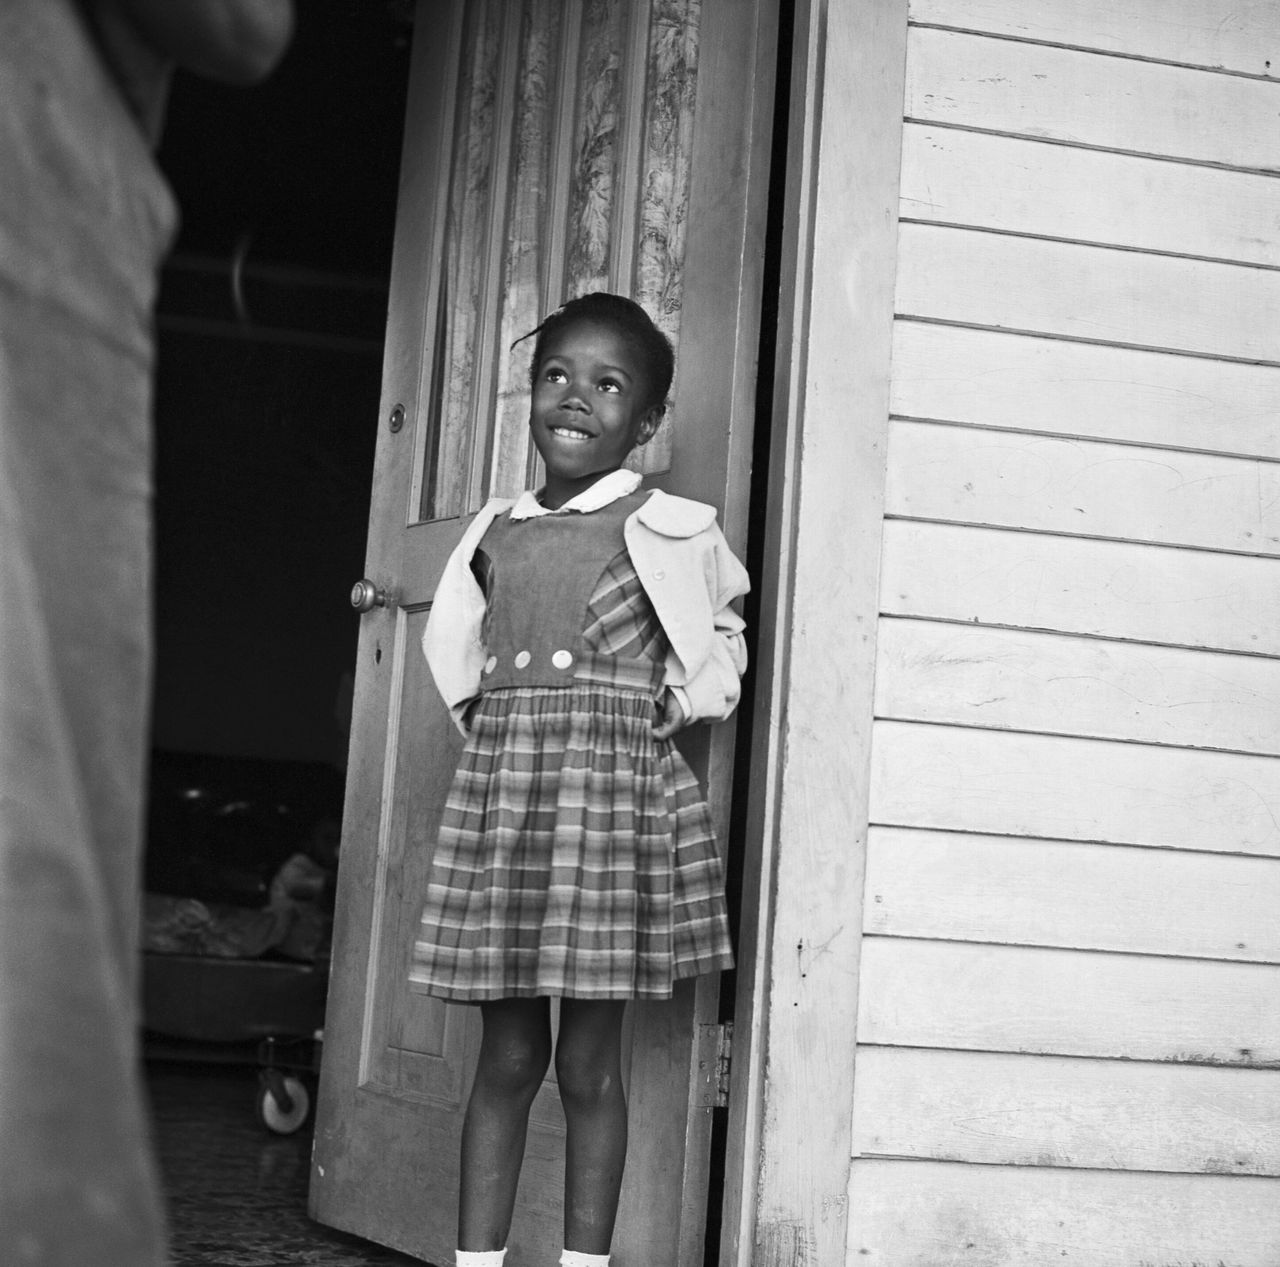 In 1960, Ruby Nell Bridges of New Orleans became one of the first Black children to integrate an elementary school in the Deep South.